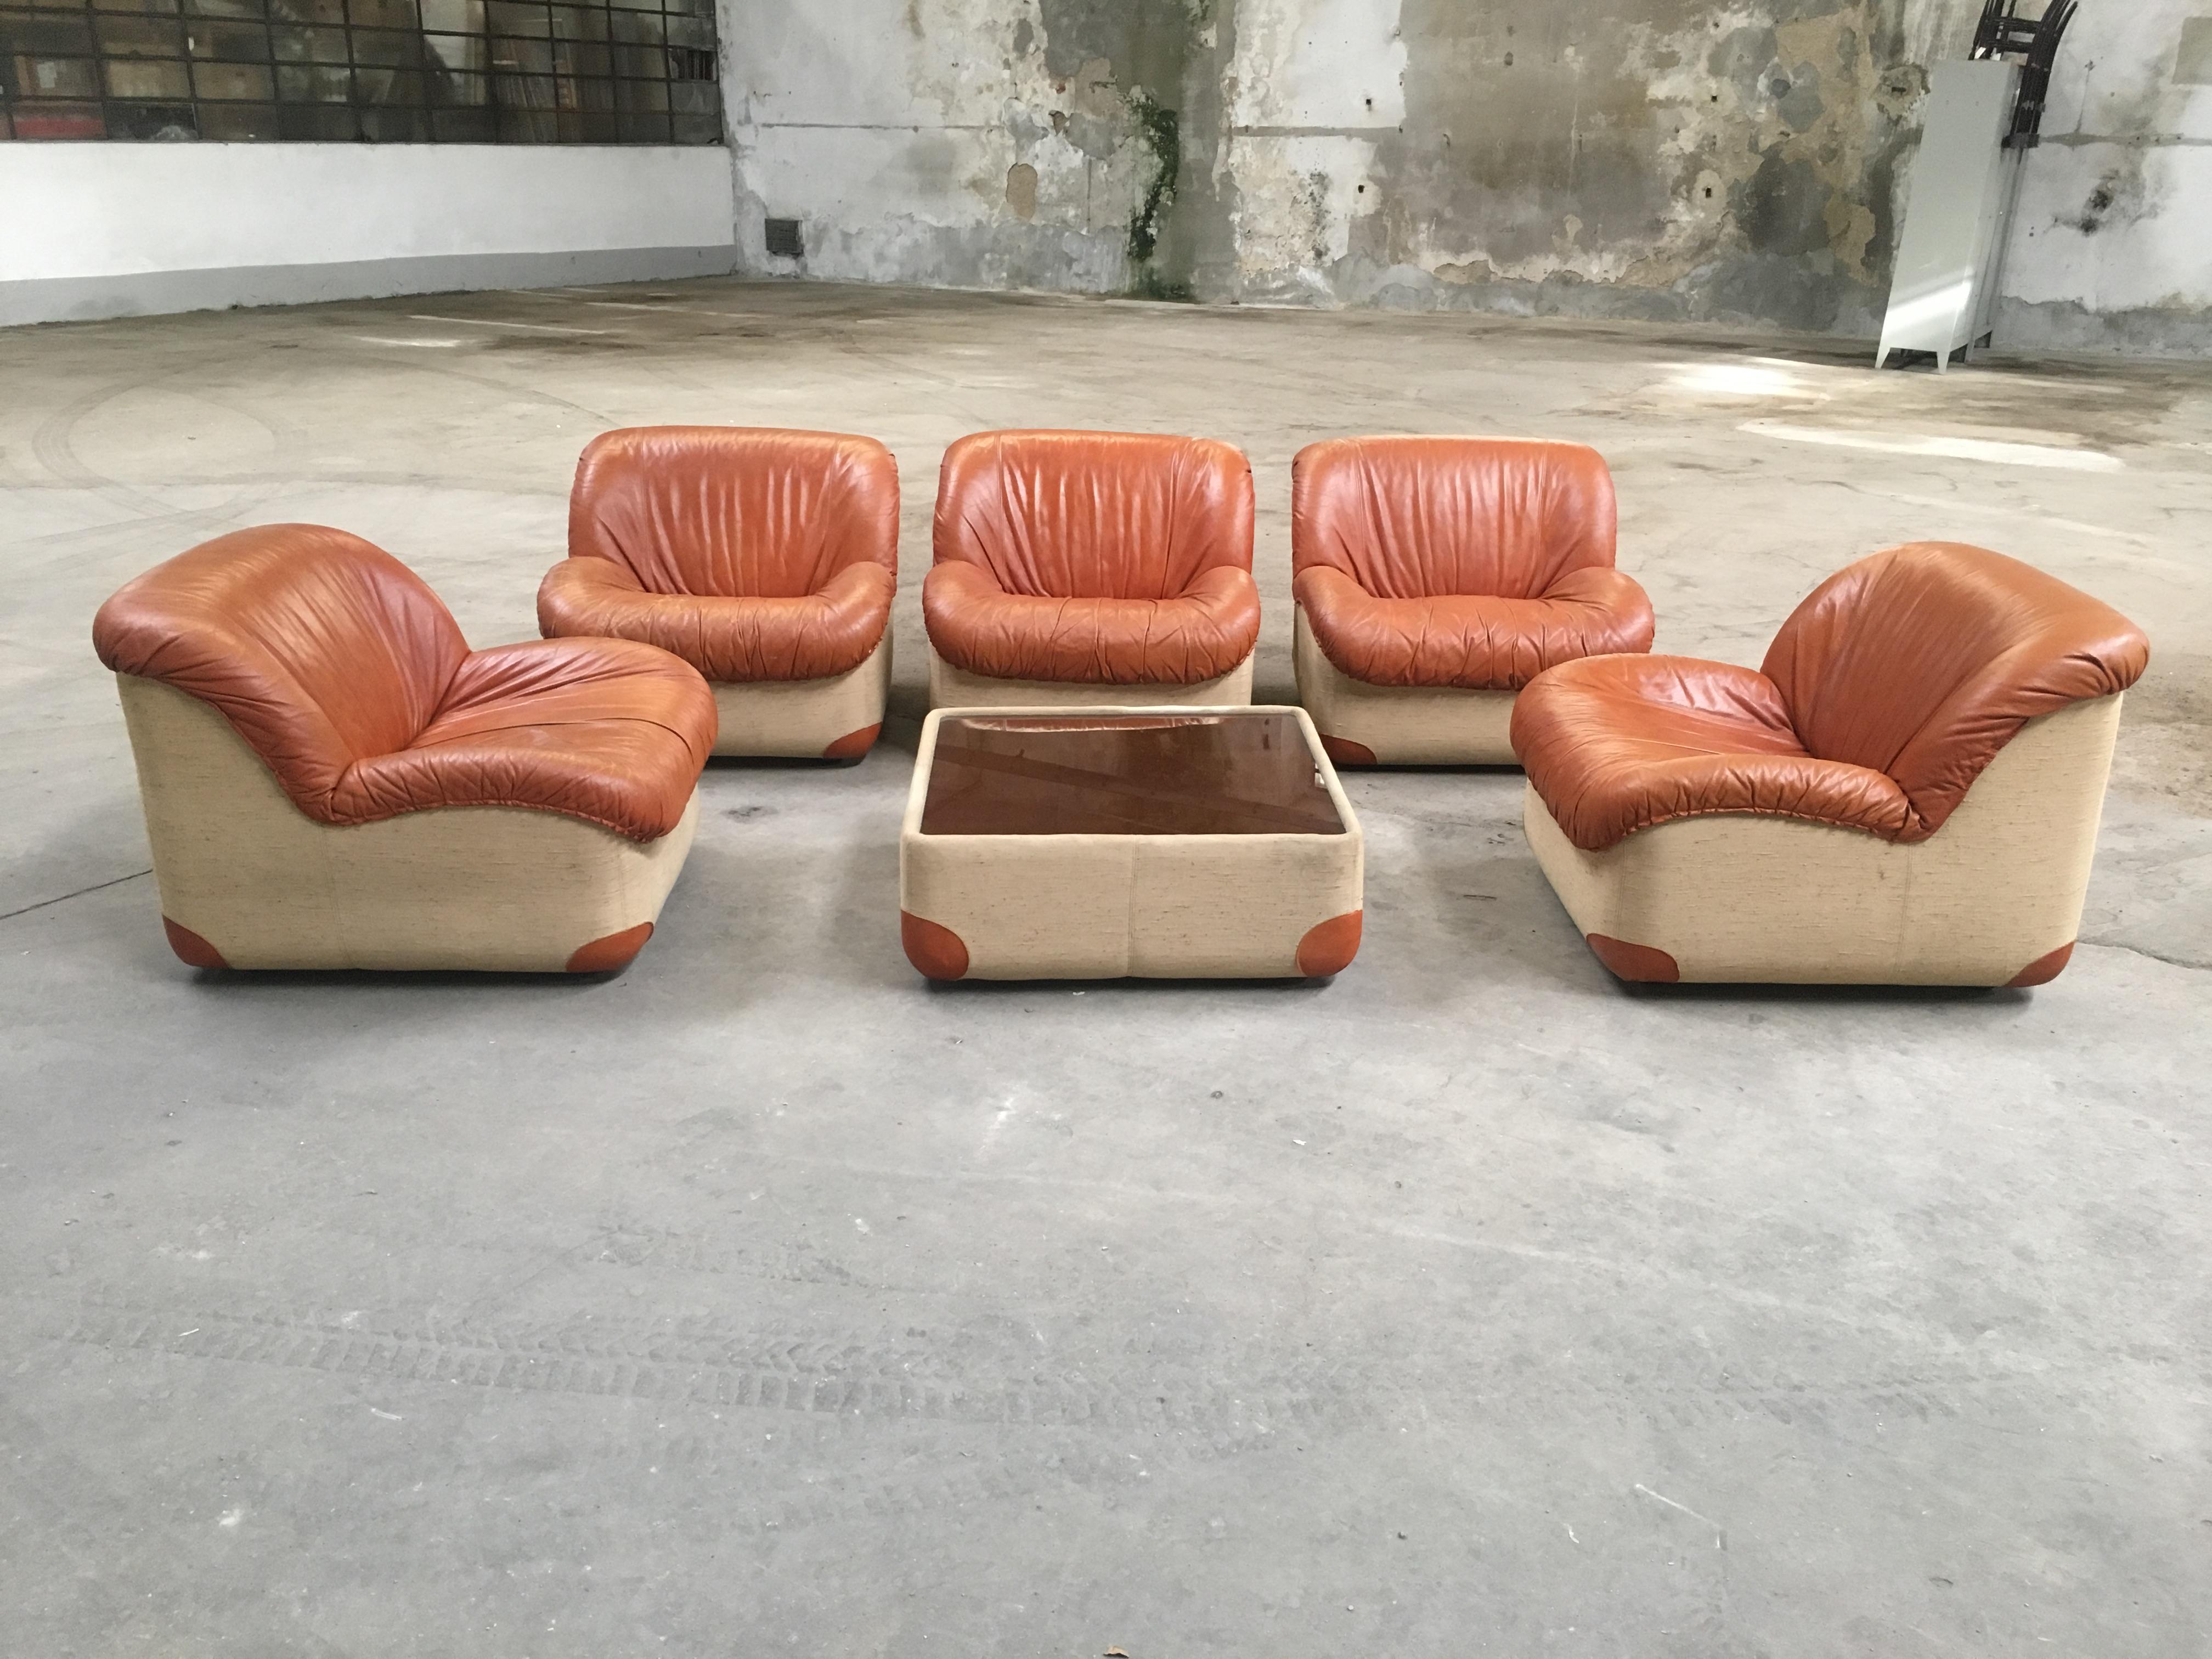 Mid-Century Modern Italian living room set with canvas and leather from 1970s.
This set consists of 5 canvas armchairs with leather seat and 1 coffee table with leather top covered with a glass.

Measures:
Armchairs: Width cm.80, depth cm.80,